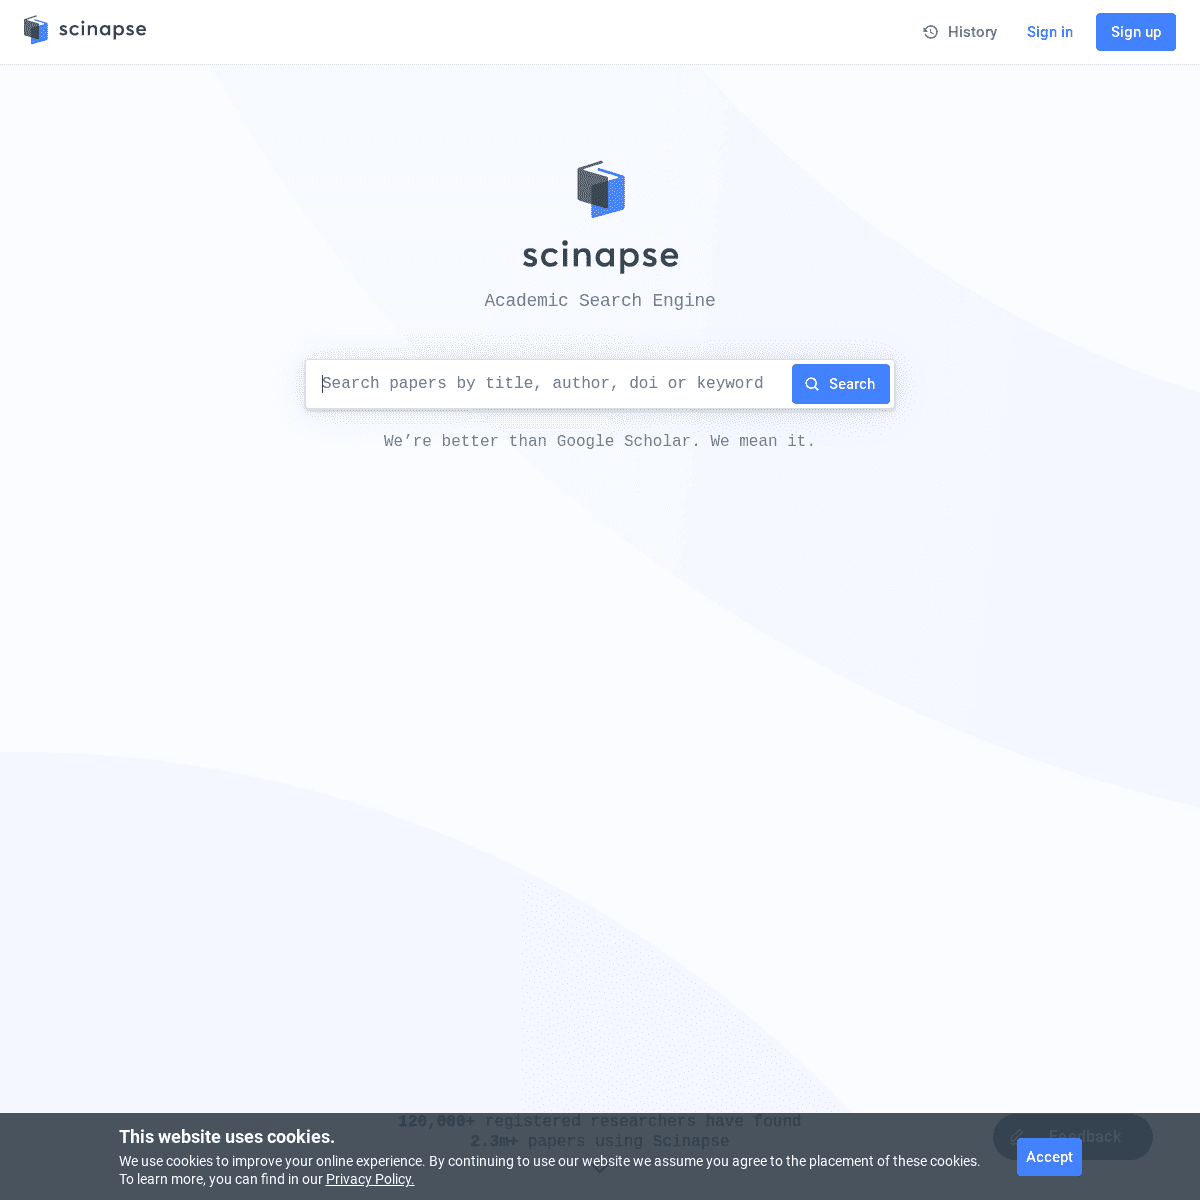 A complete backup of https://scinapse.io